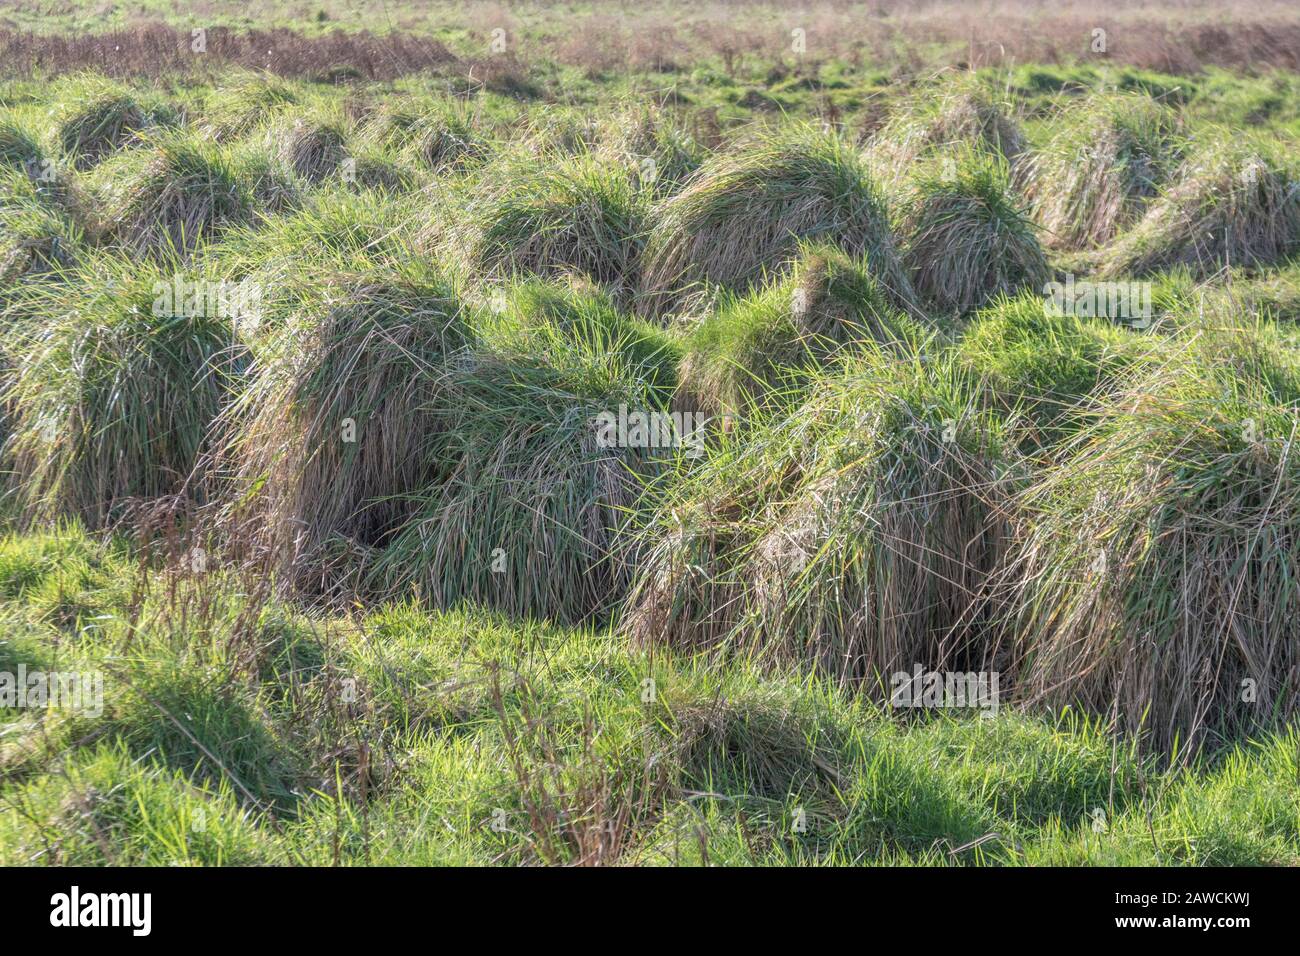 Side lit grass hummocks in rough moorland. Possibly Tussock grass but not properly identified - though good example of rough scrubland grasses. Stock Photo